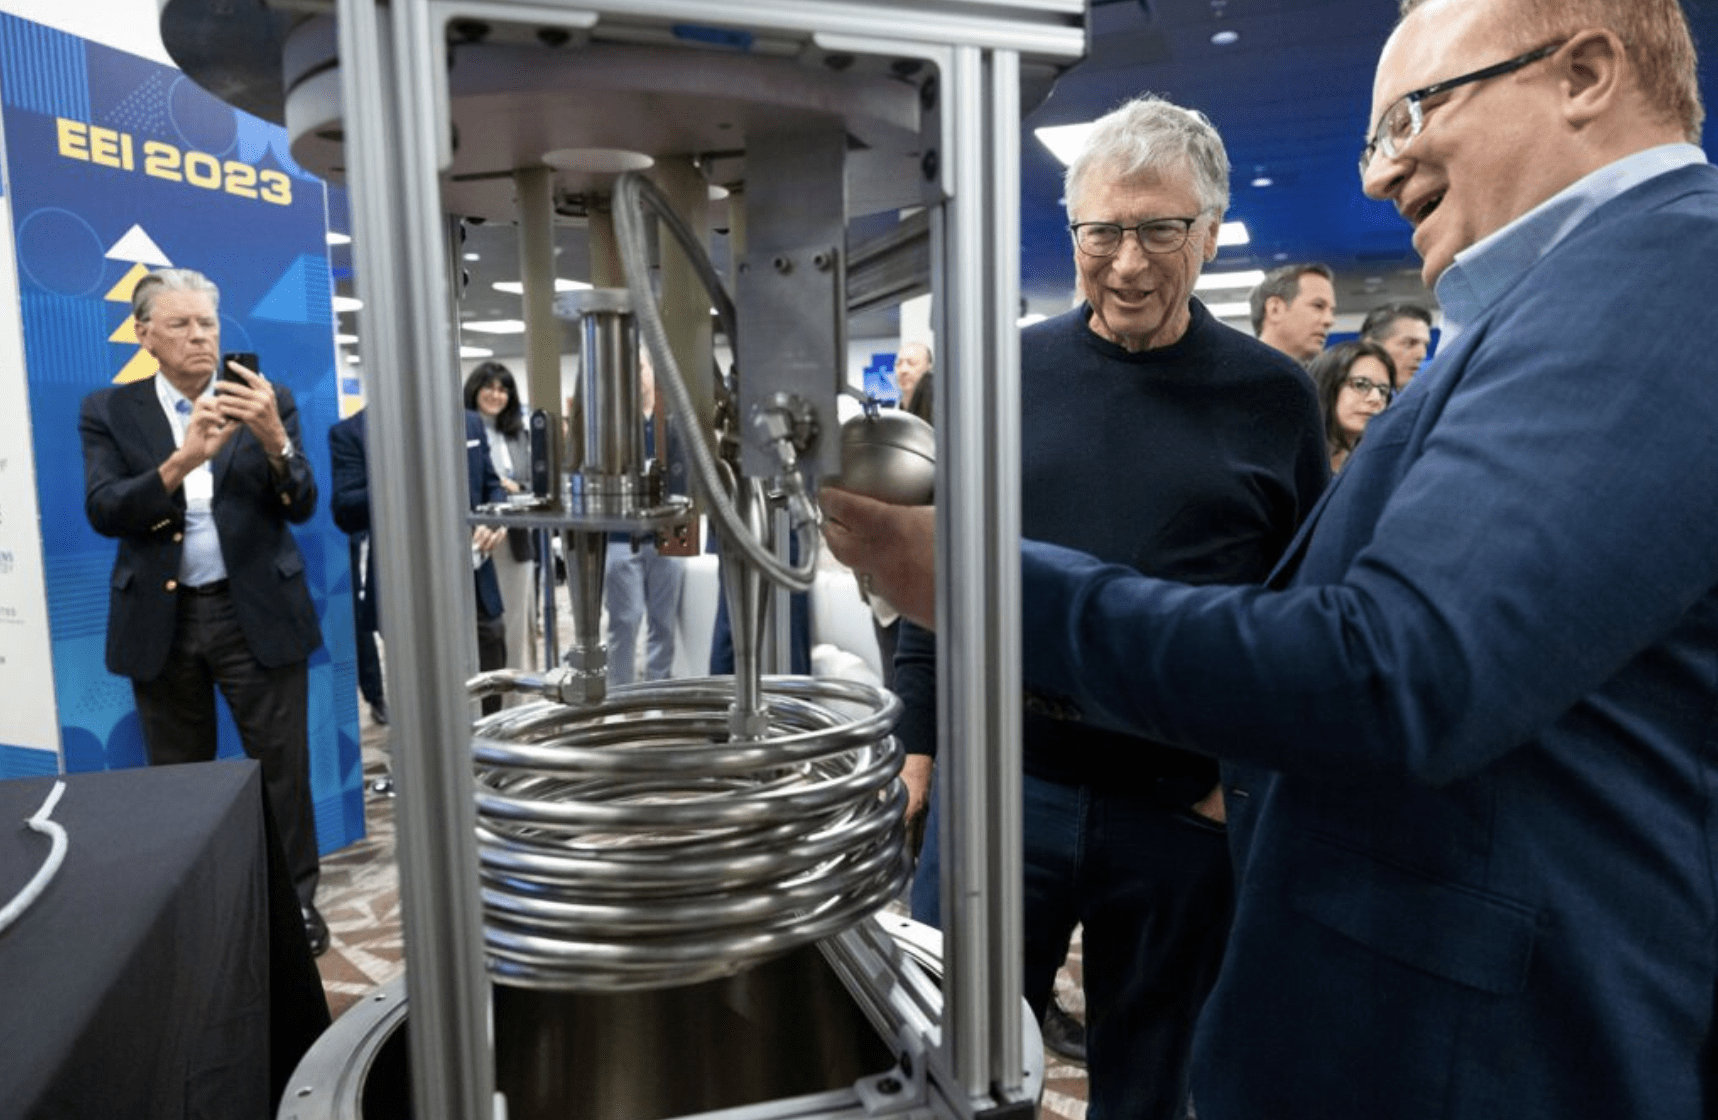 BE Founder Bill Gates visits with the technology companies featured at EEI 2023